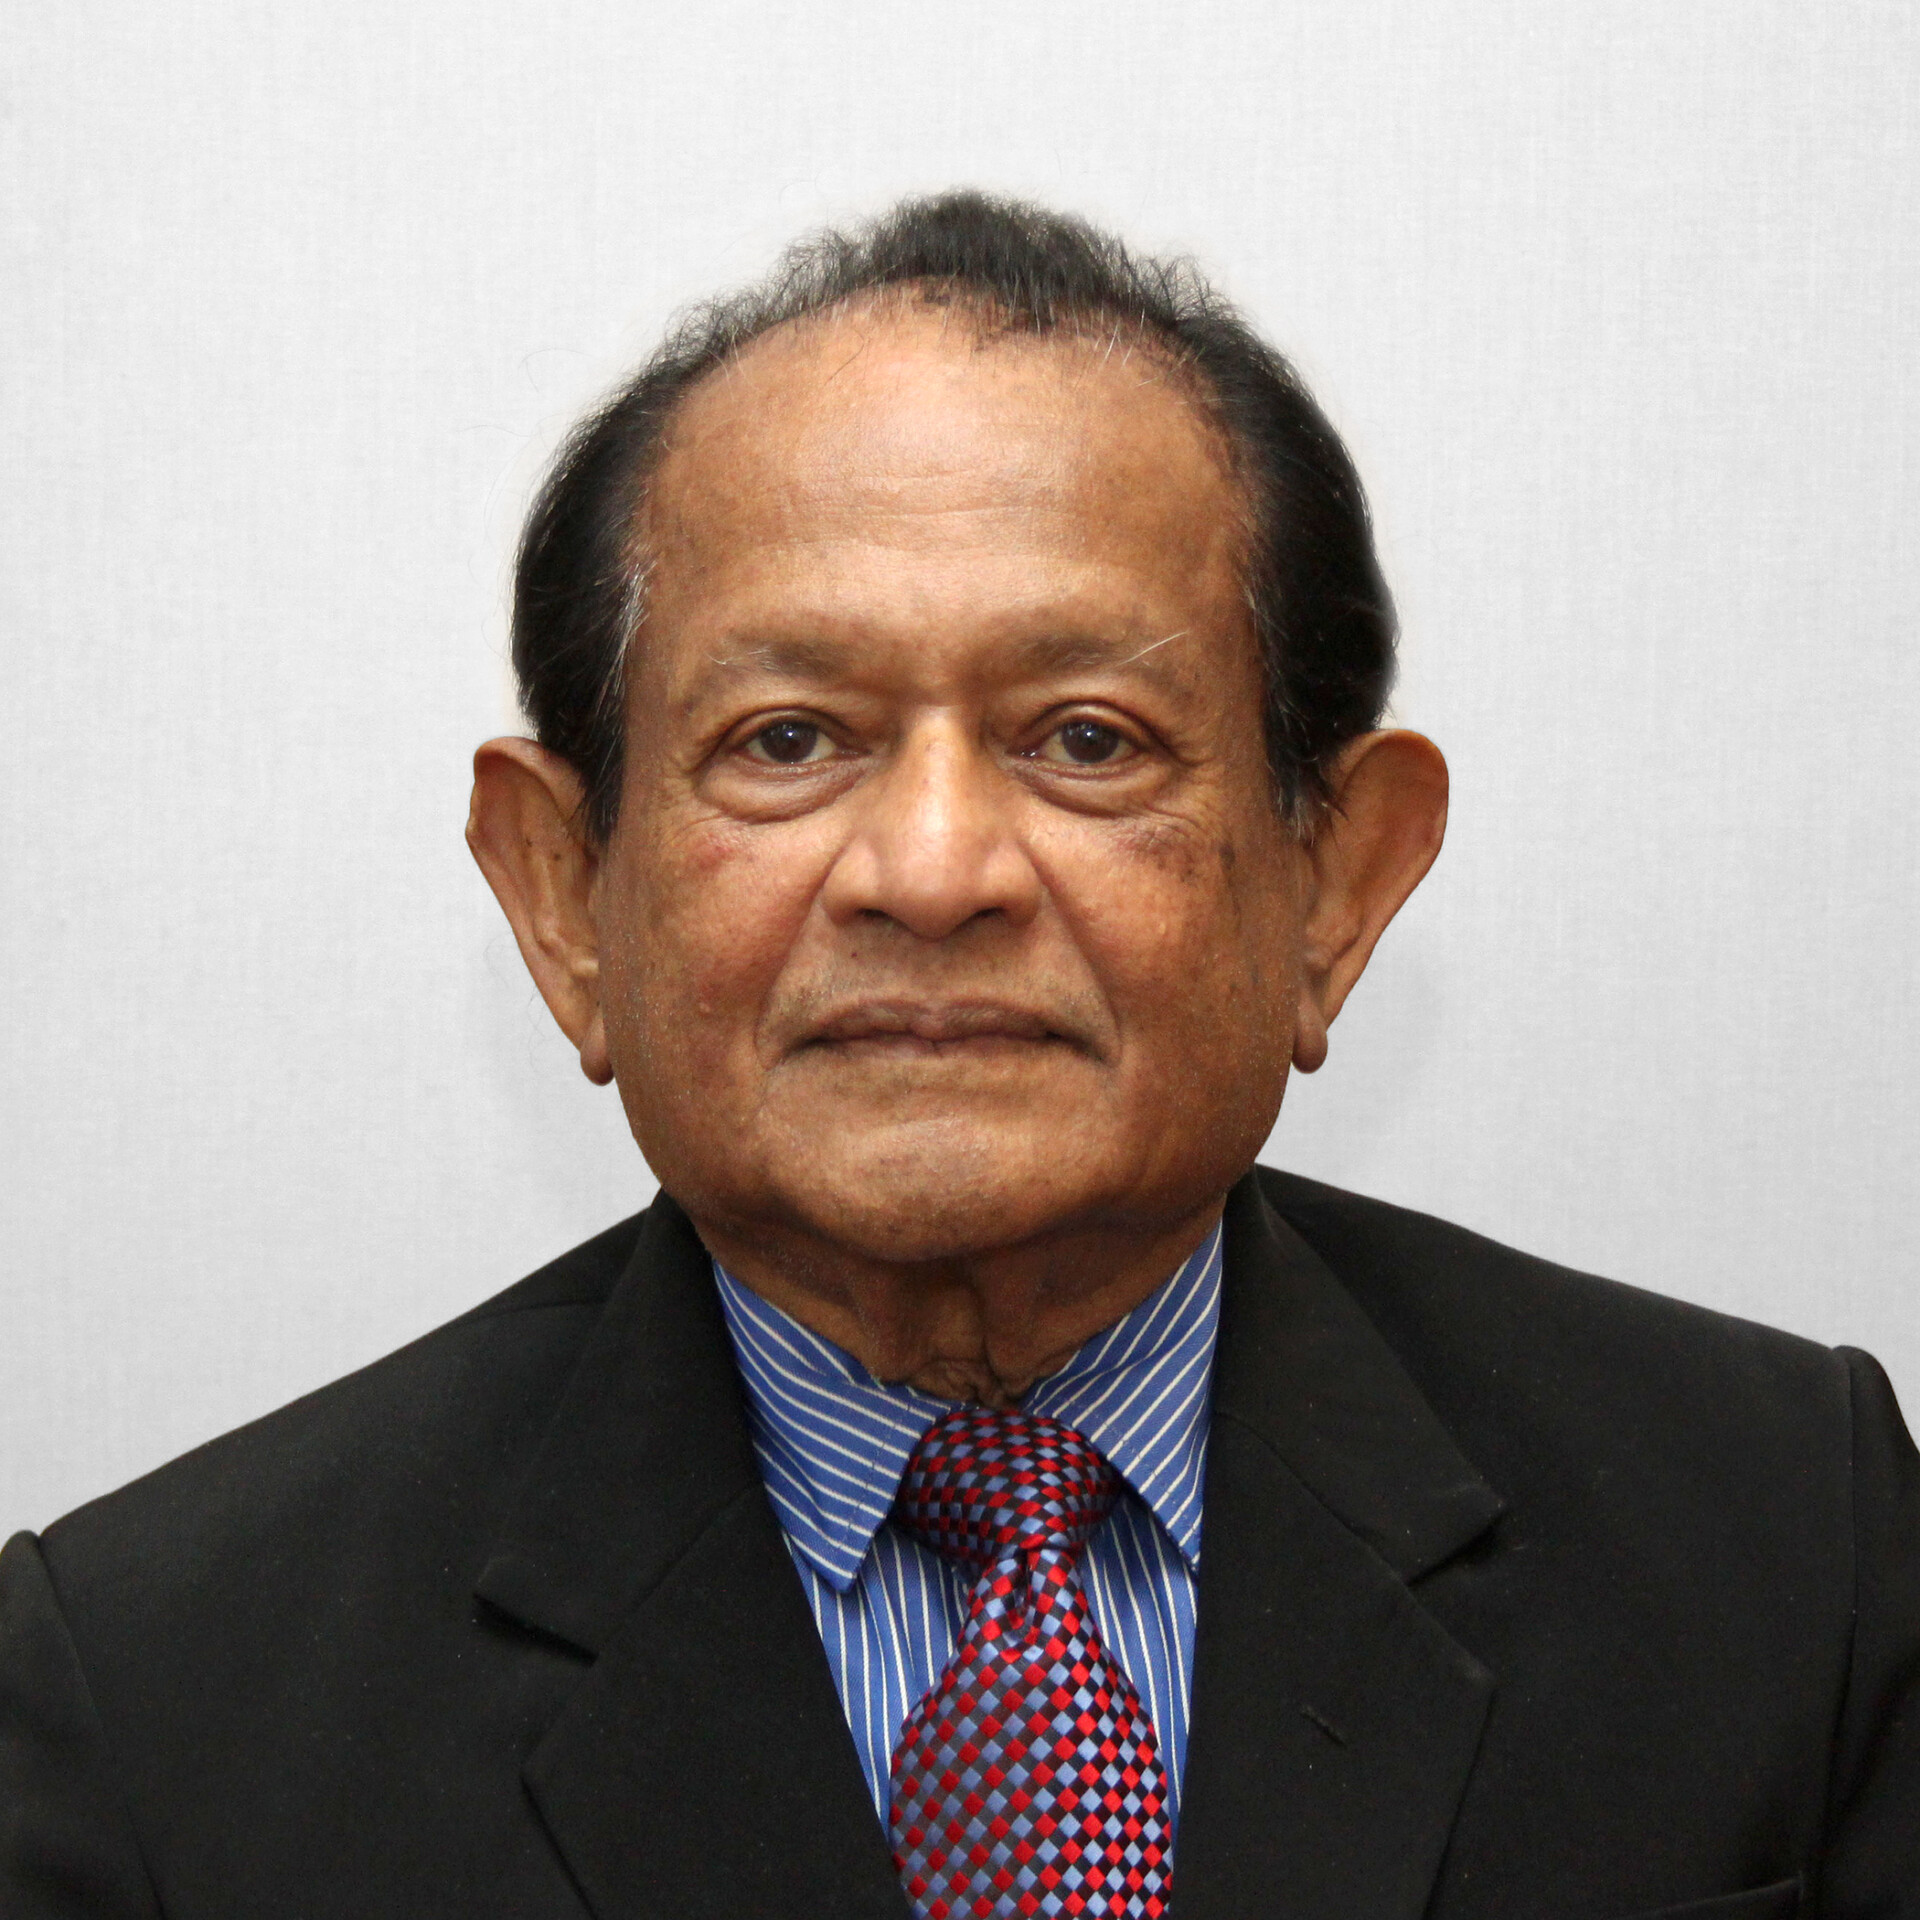 Dr. Ananda Thevathasan, BSc., MBA, Ph.D.